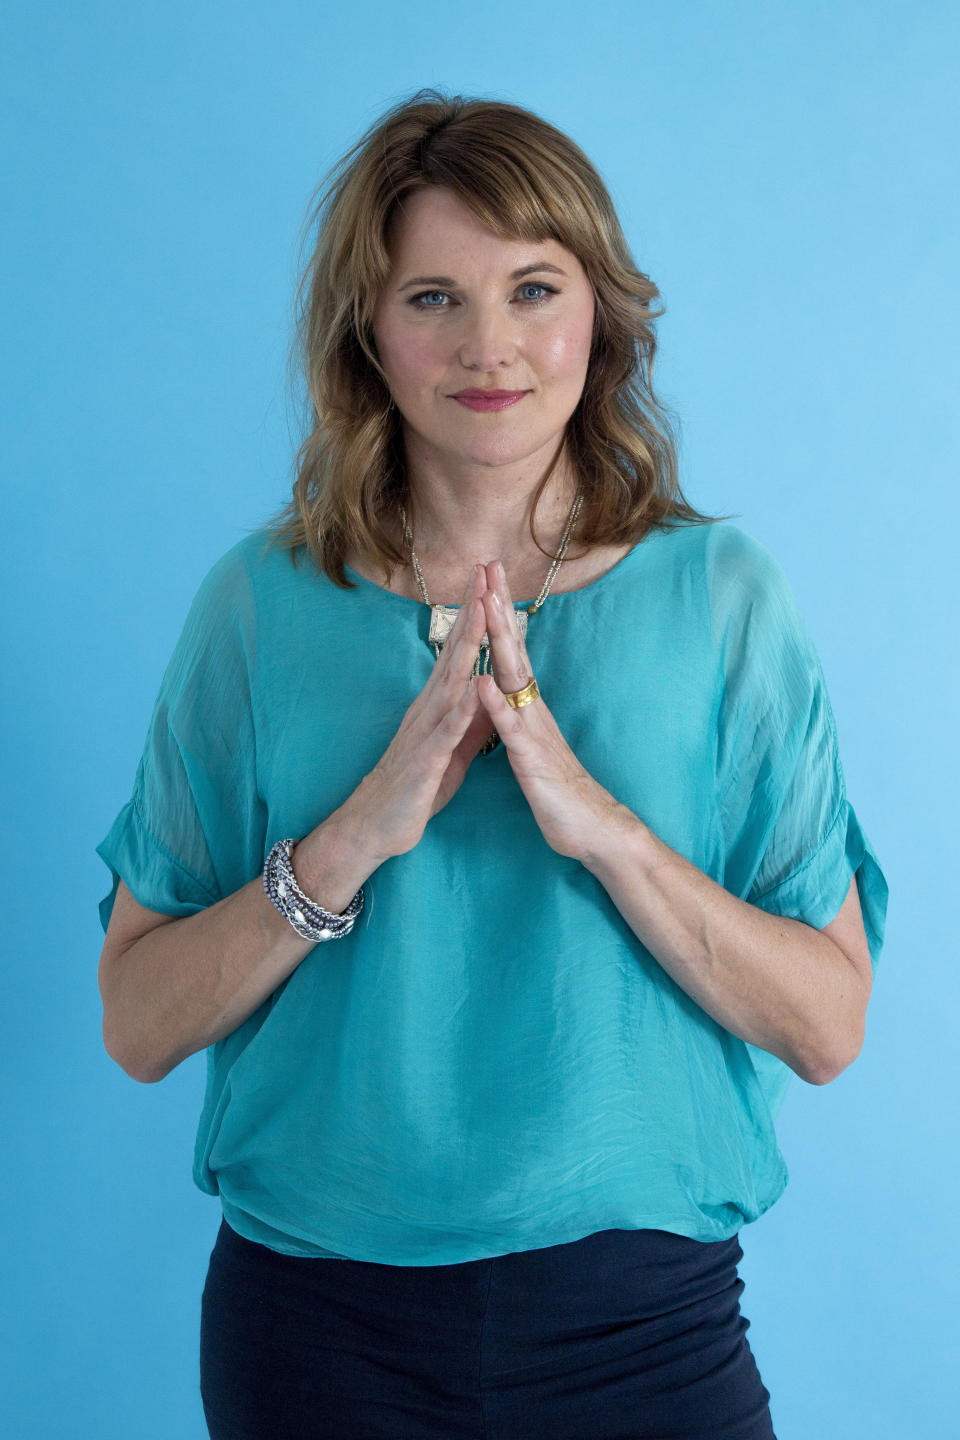 This July 22, 2019 photo shows actress Lucy Lawless posing for a portrait in New York to promote her new crime TV series “My Life Is Murder,” which premieres on Acorn TV starting Aug. 5. (Photo by Andy Kropa/Invision/AP)